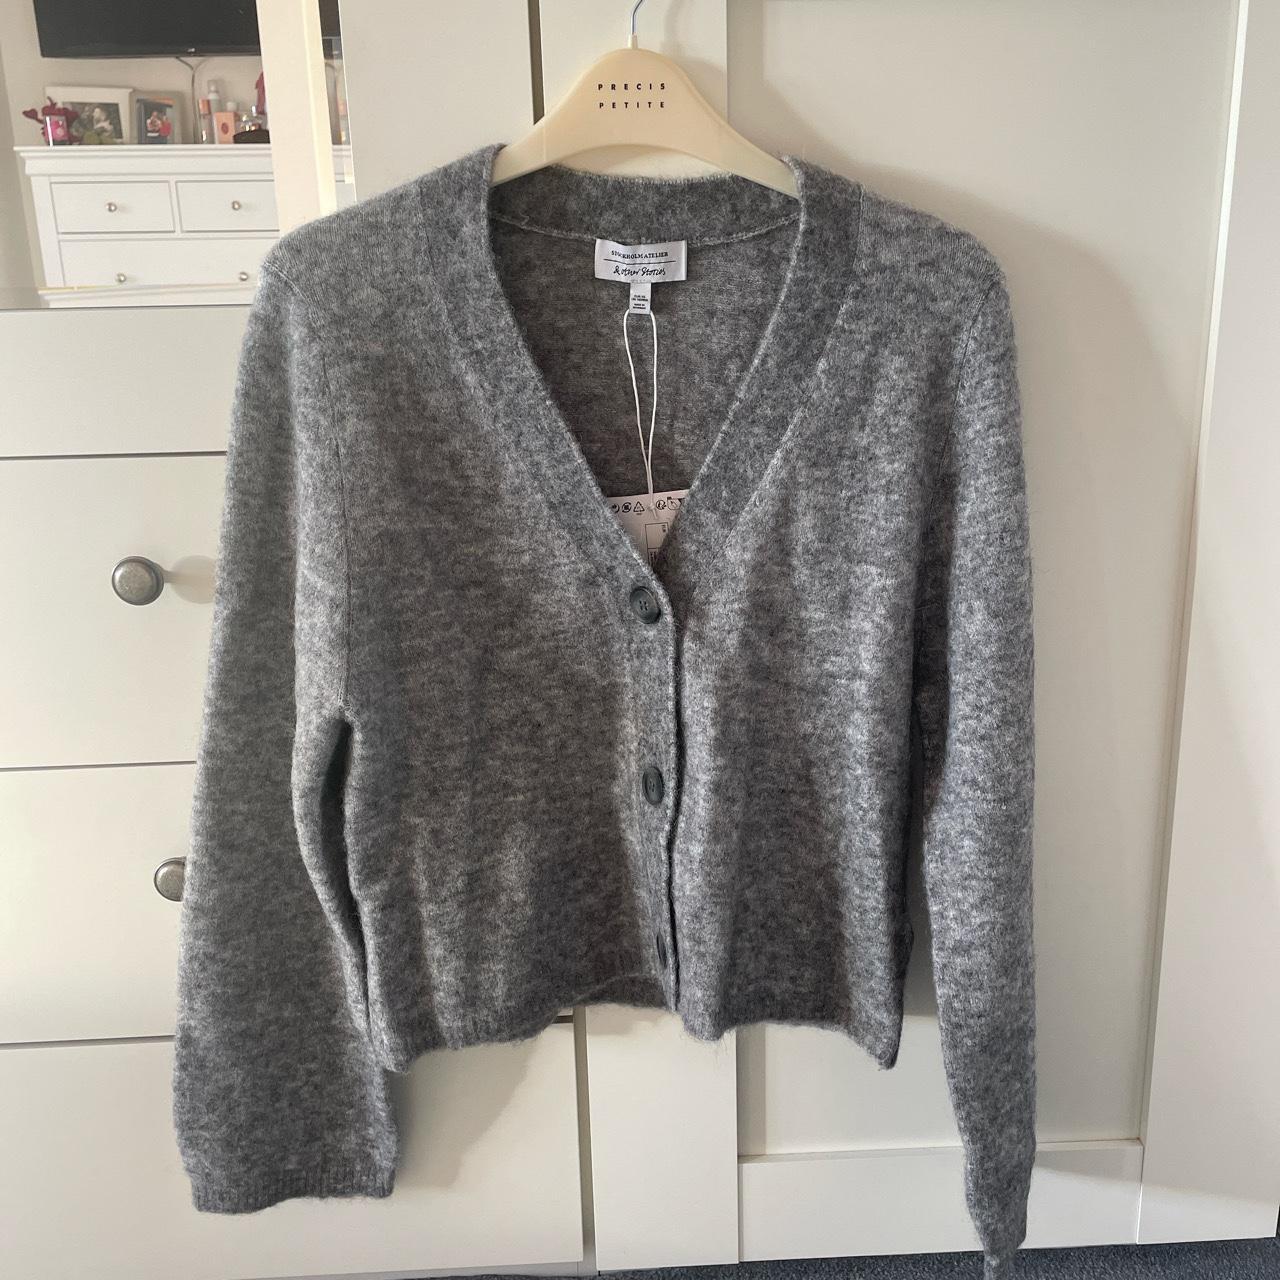 Current season grey cardigan Cropped Not open to... - Depop